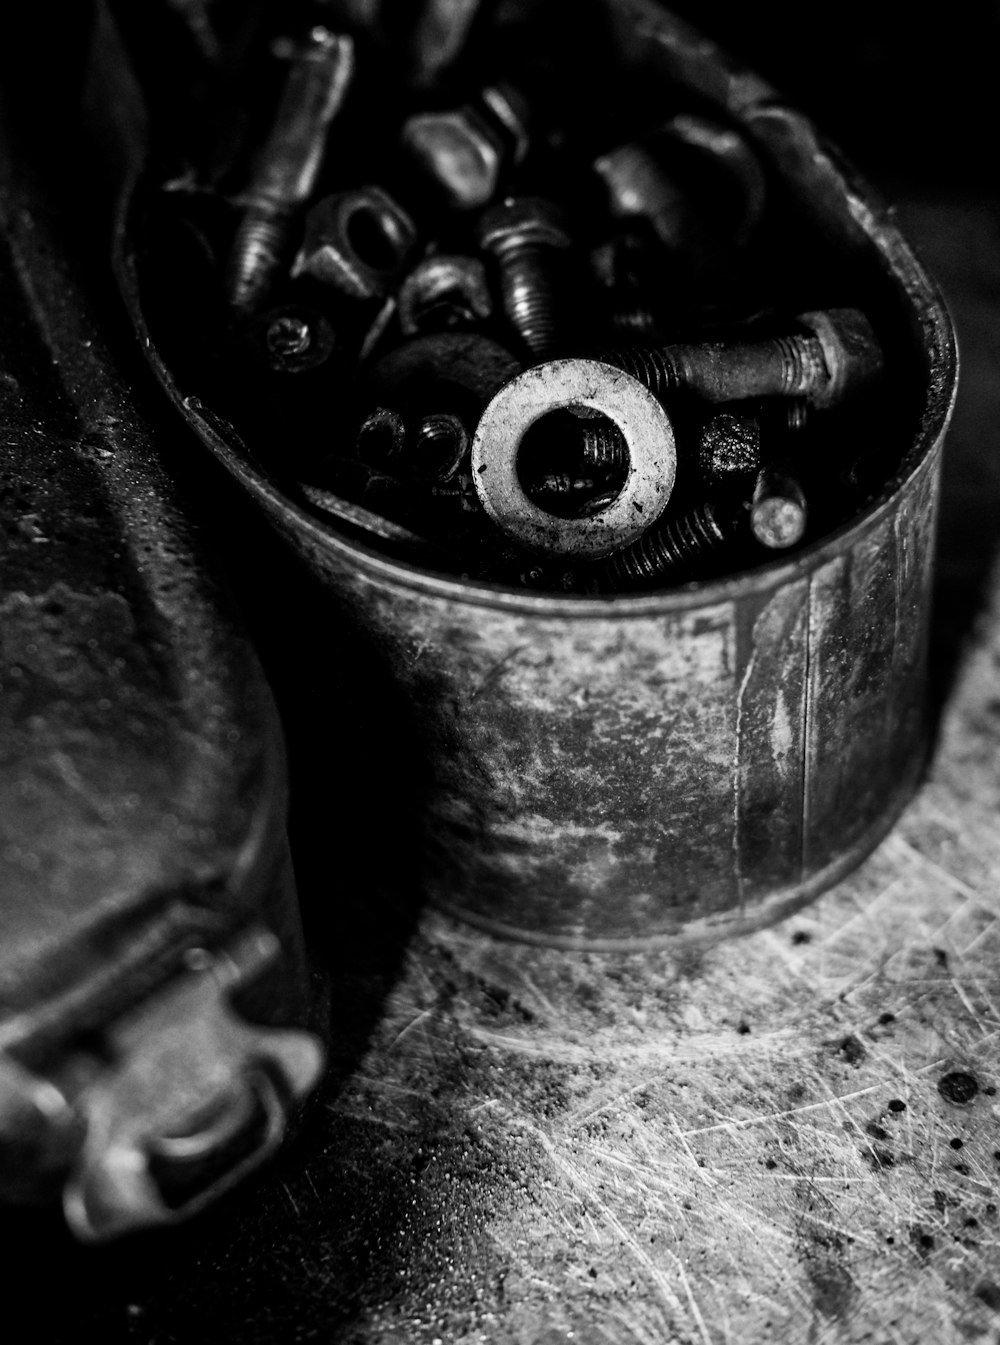 grayscale photo of screws and washers on can